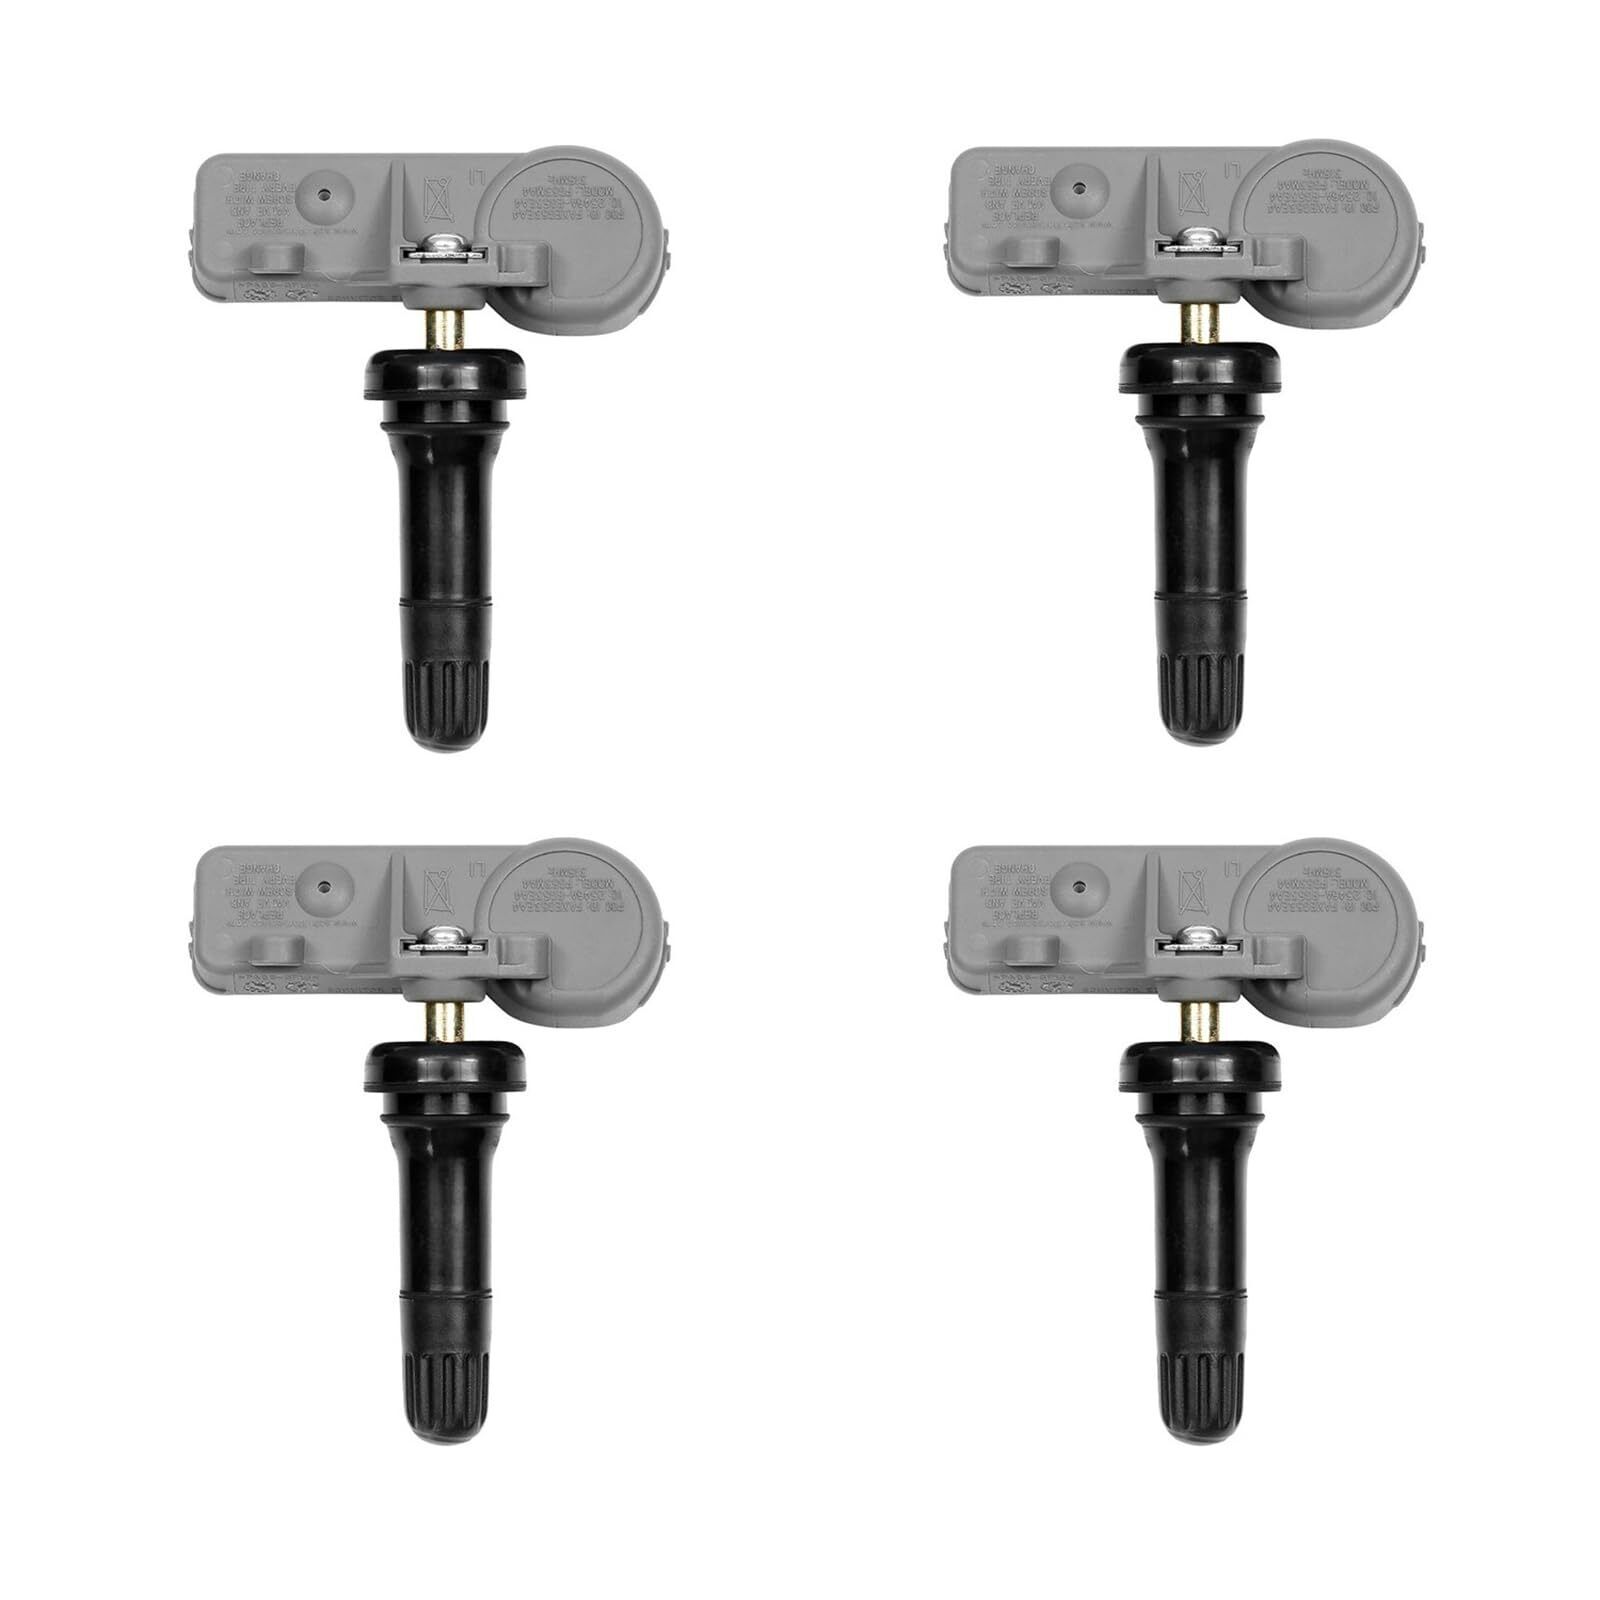 Tire Pressure Sensor 315MHz TPMS Snap-in 4Pcs Compatible with Chevy GMC Cadil...